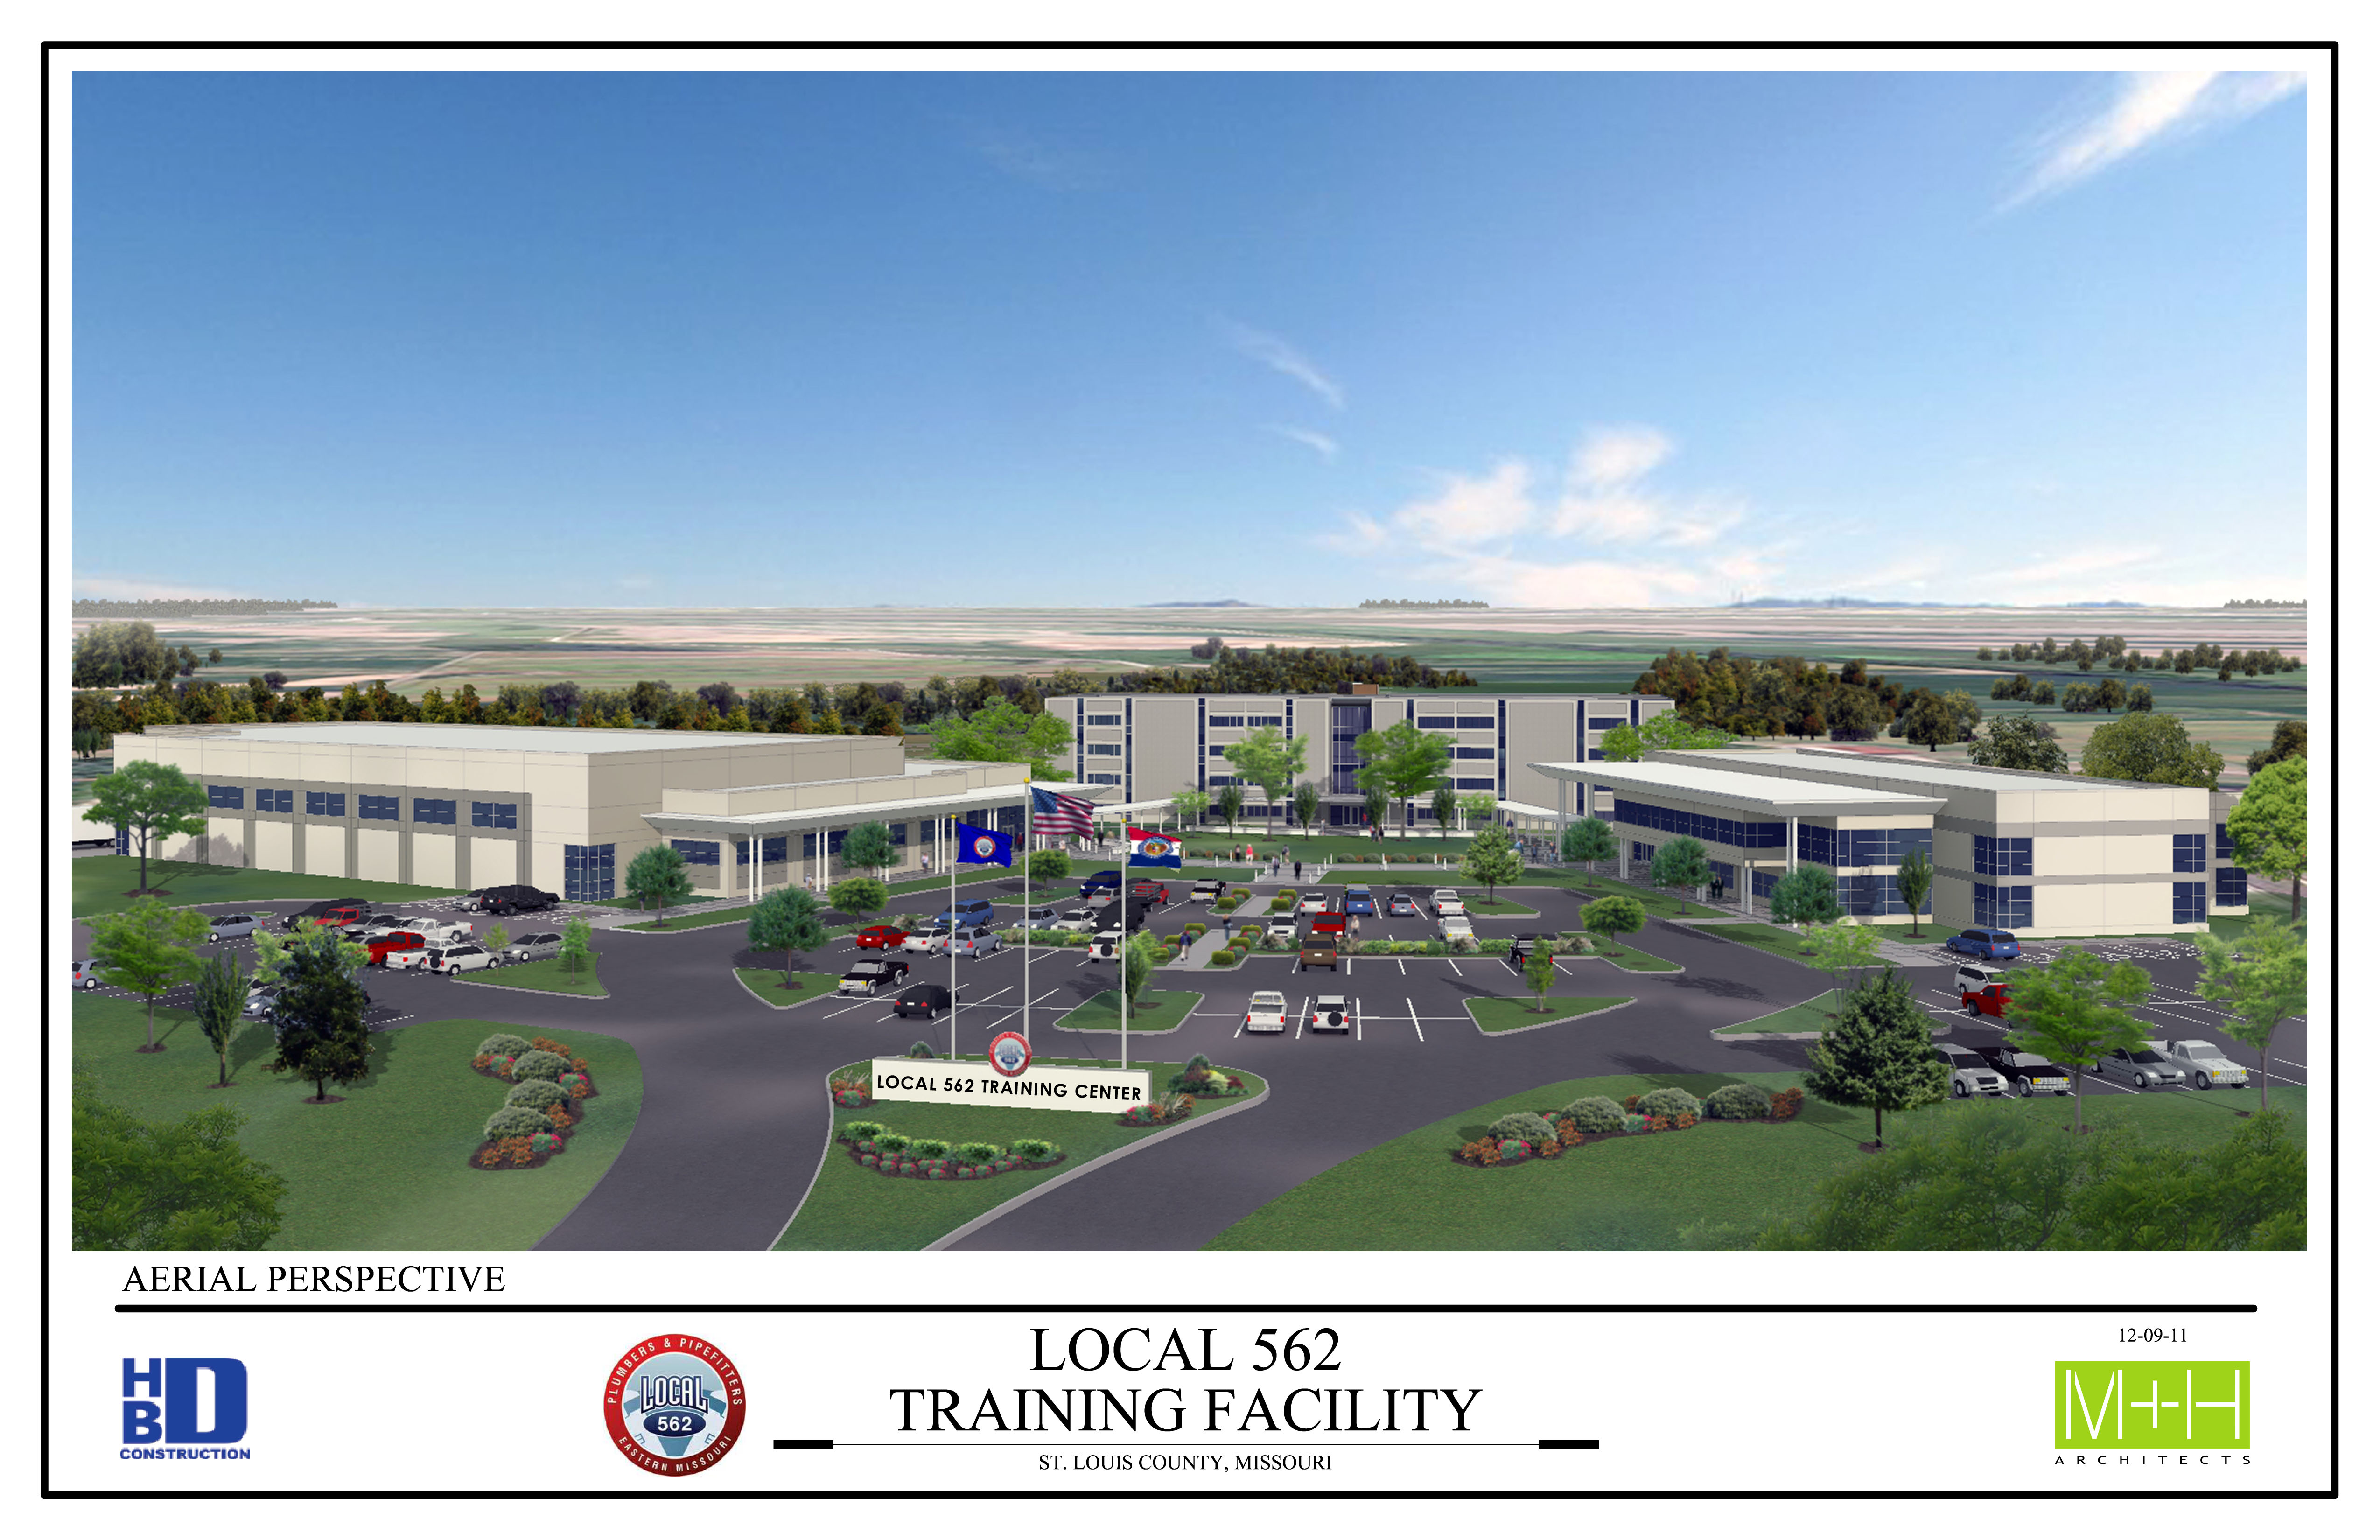 HBD Construction has been chosen to build a new $12 million training facility ca